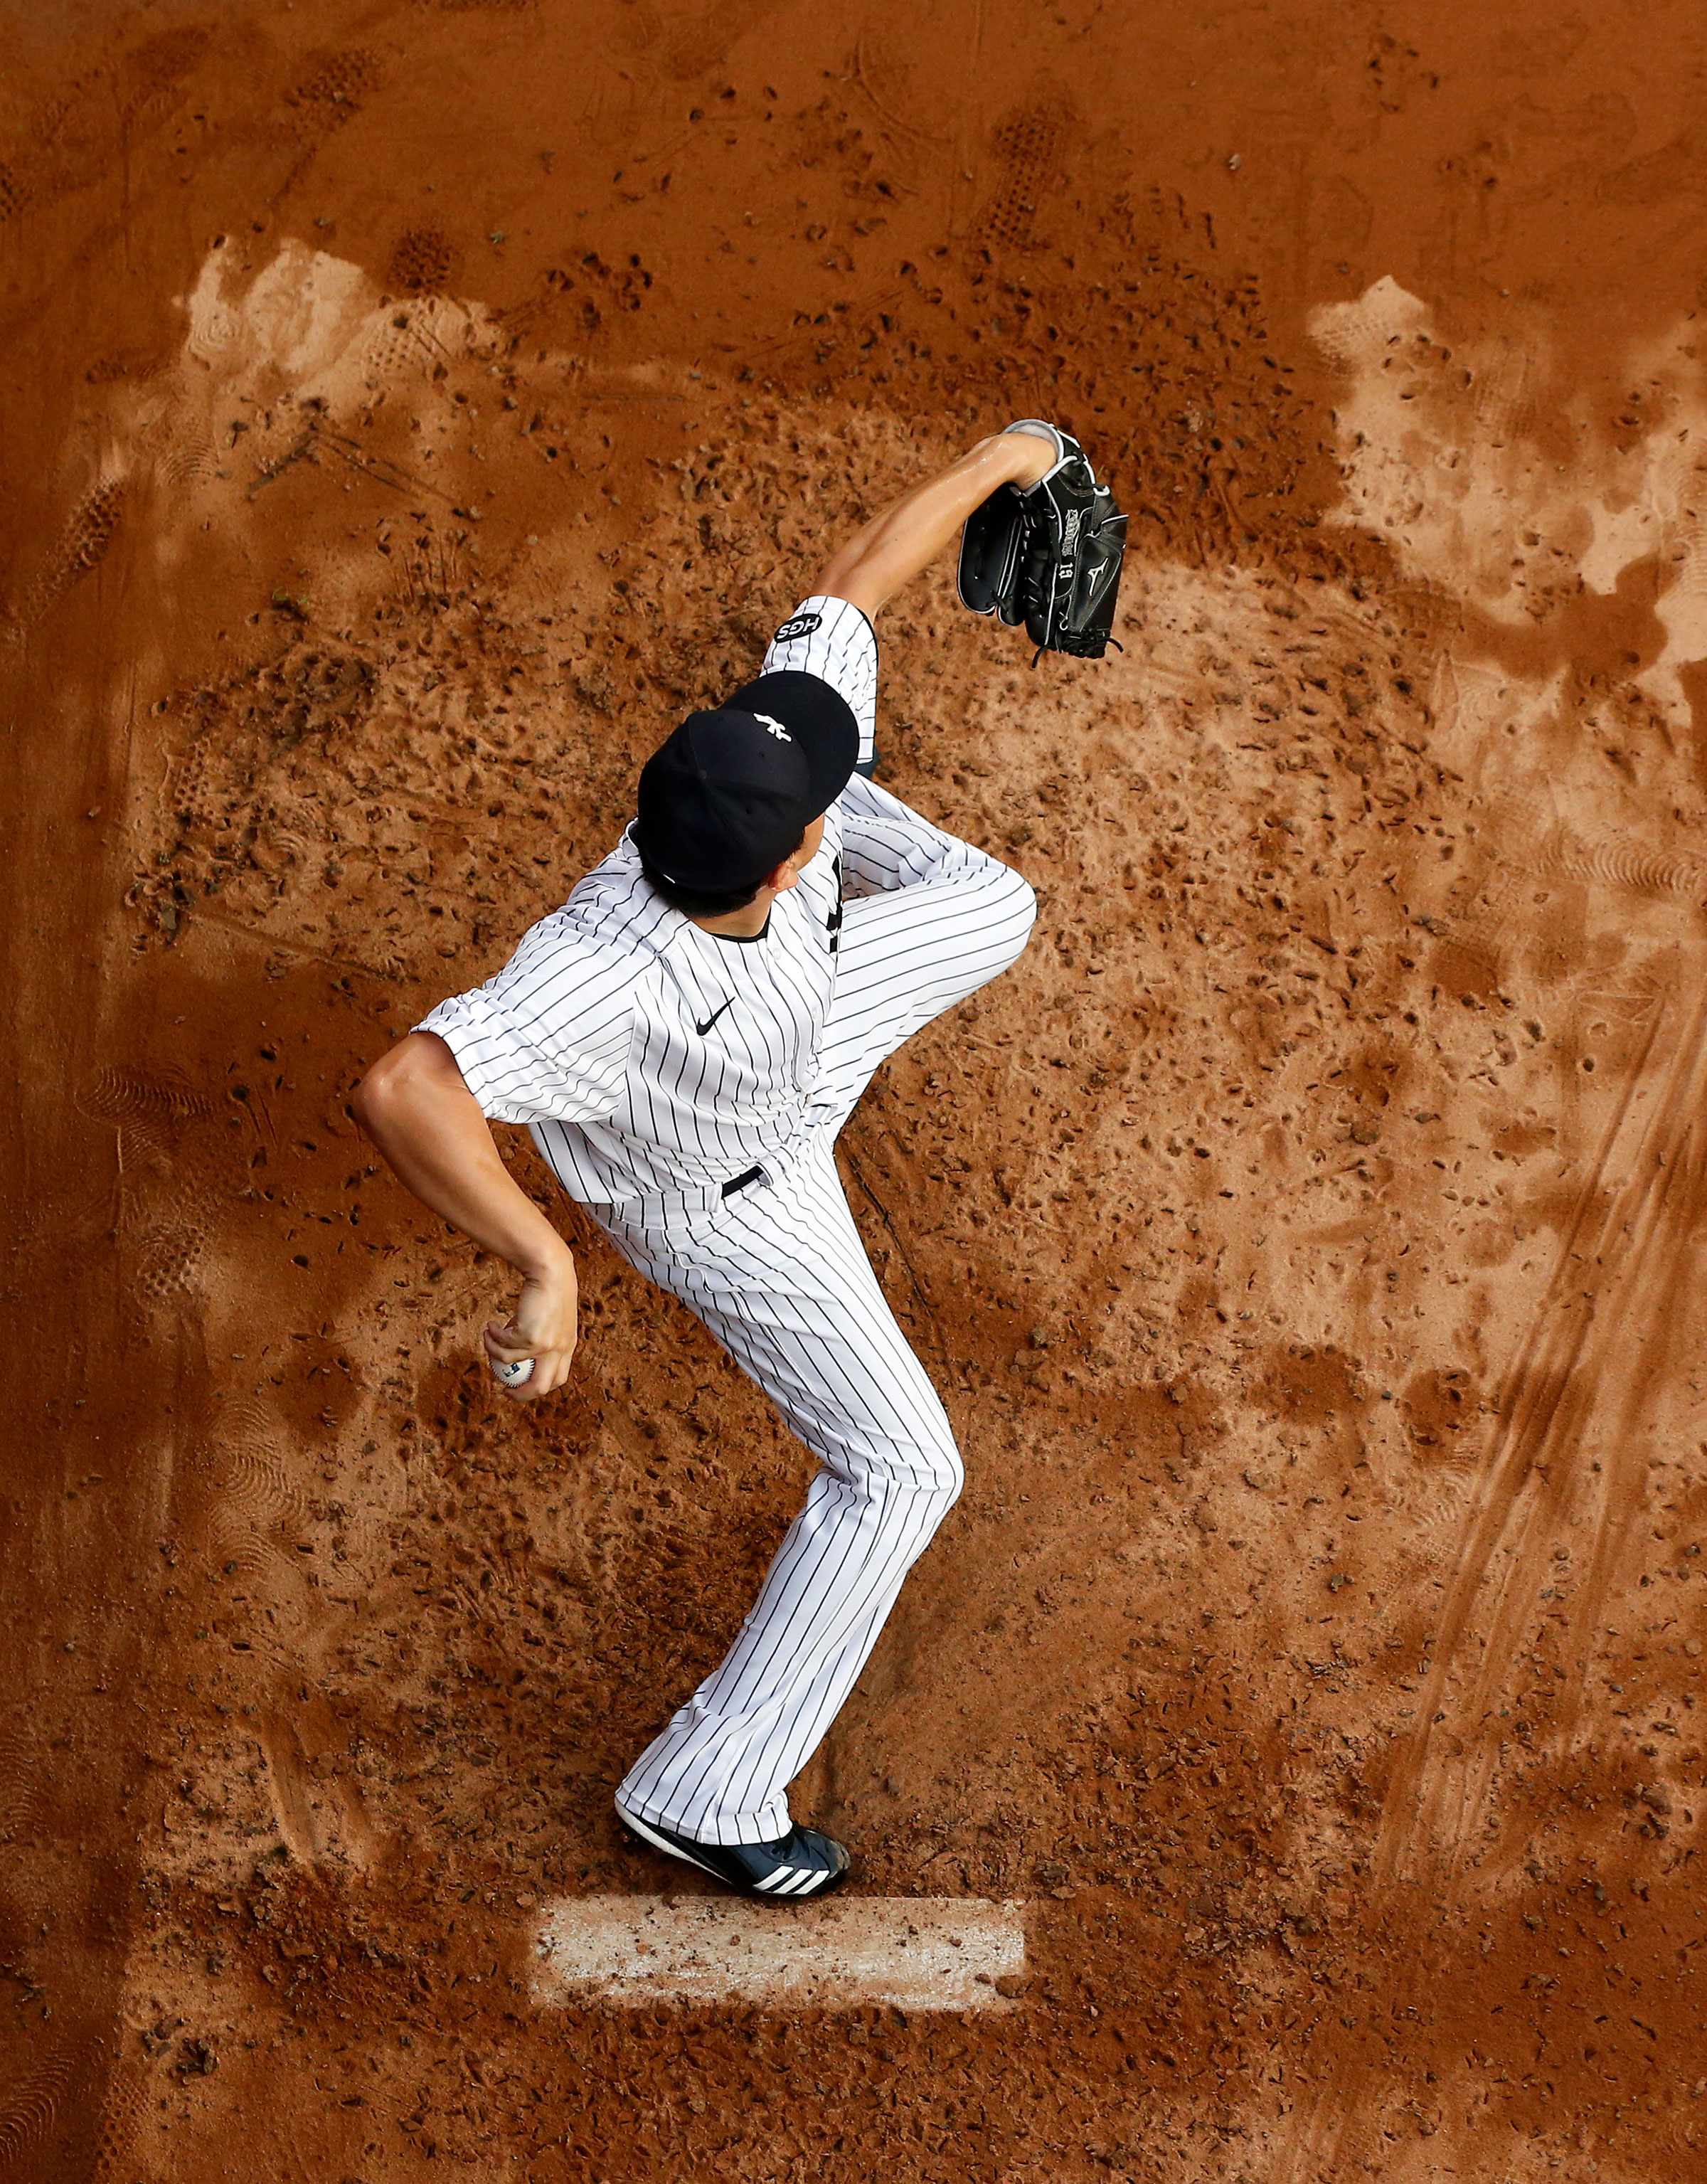 Masahiro Tanaka of the New York Yankees warms up in the bullpen before a game against the Atlanta Braves on August 12, 2020 in New York City. (Jim McIsaac—Getty Images)